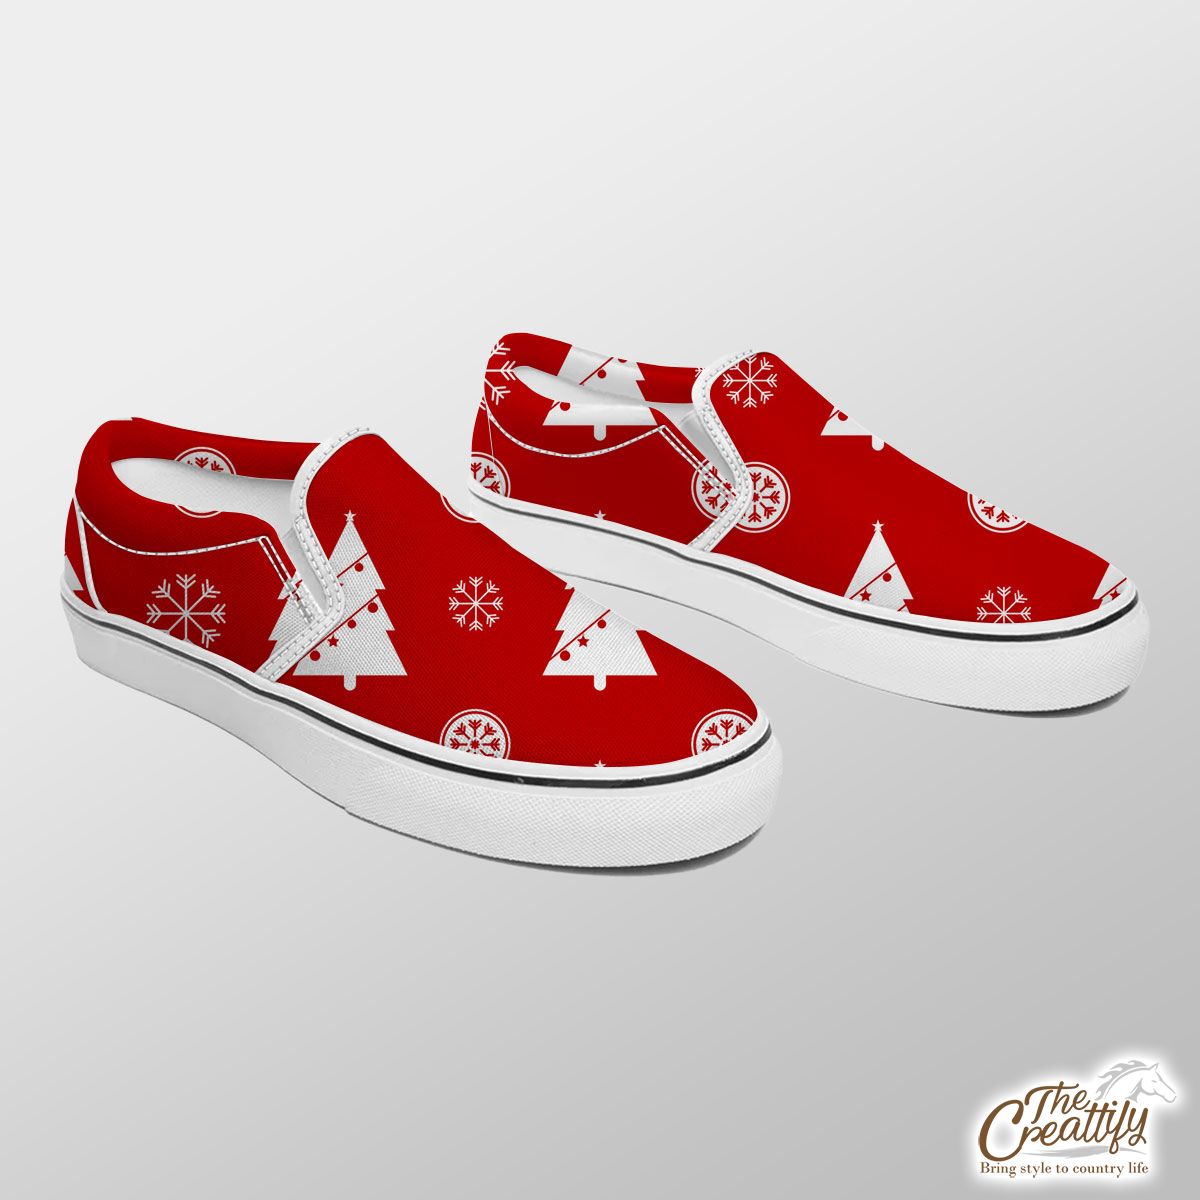 Pine Tree Decorated With Christmas Light And Snowflake Seamless Red Pattern Slip On Sneakers